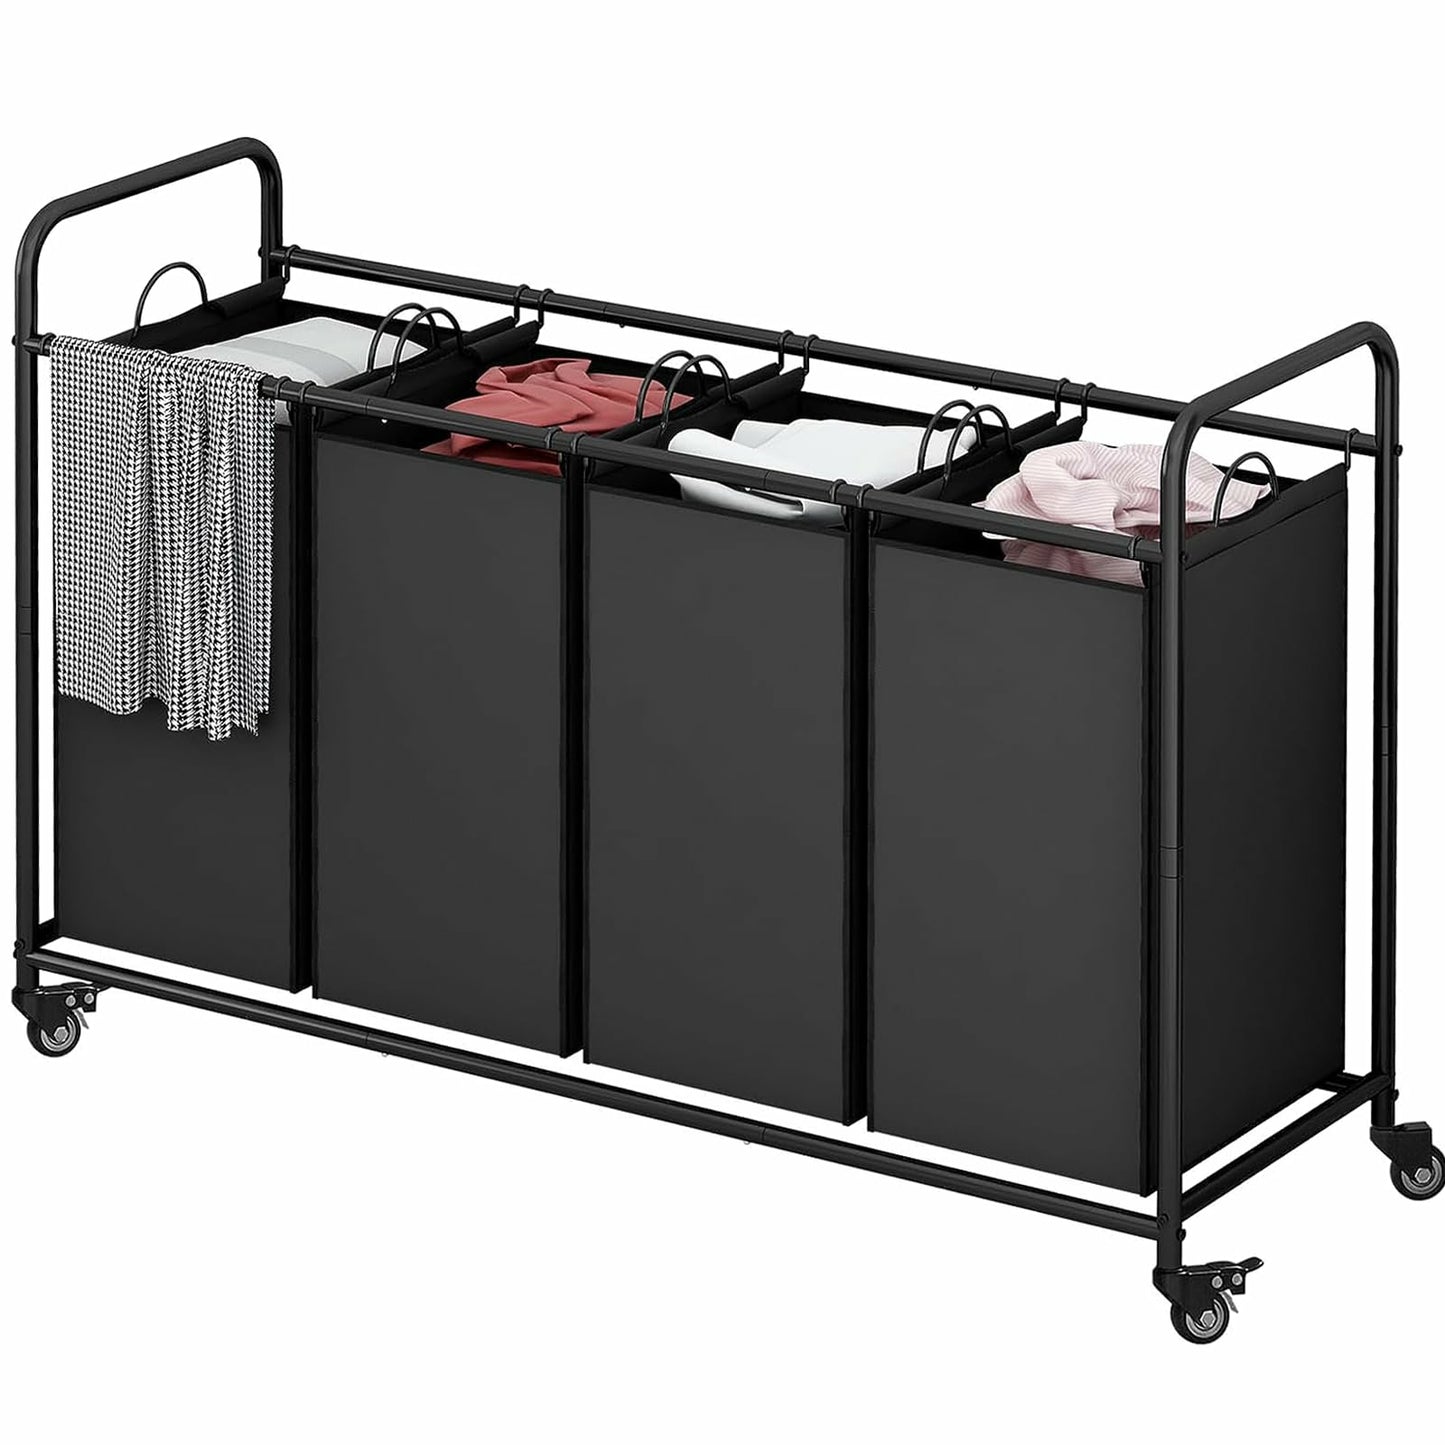 Linzinar 4-Bag Laundry Basket Cart with Heavy Duty Rolling Lockable Wheels and Removable